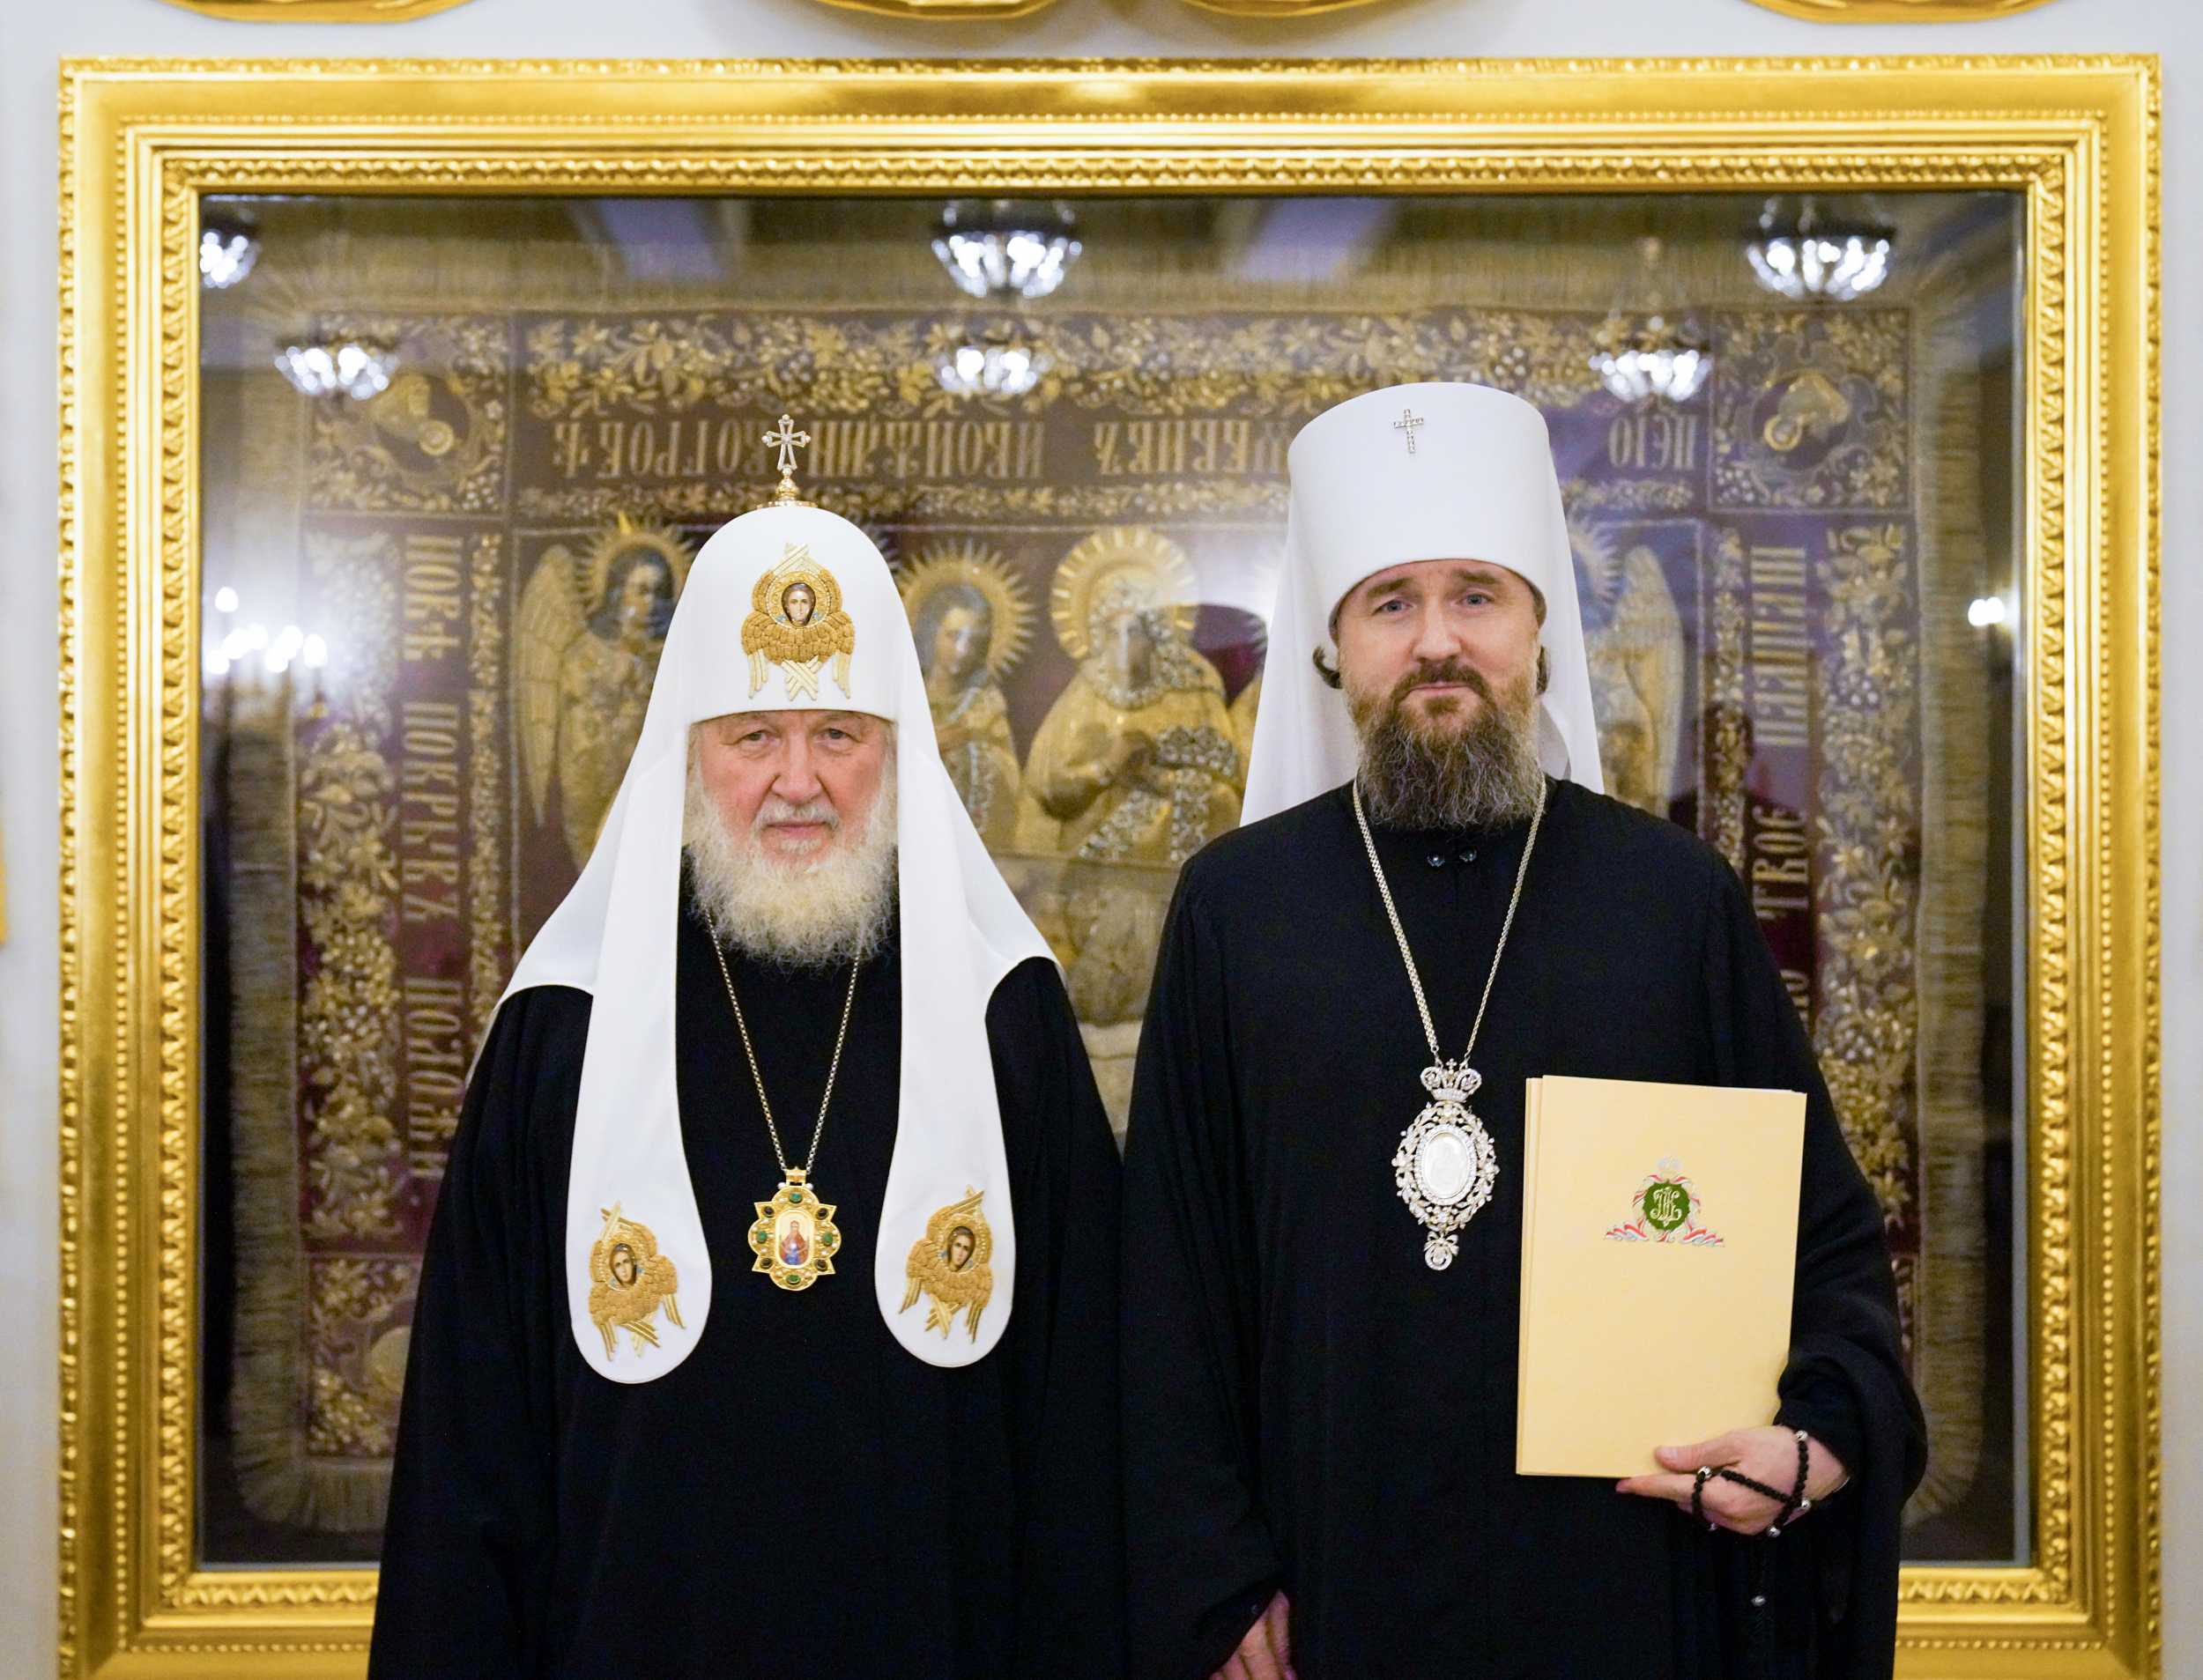 His Holiness Patriarch Kirill Received the Head of the Affairs of the Moscow Patriarchate, Metropolitan Gregory of the Resurrection